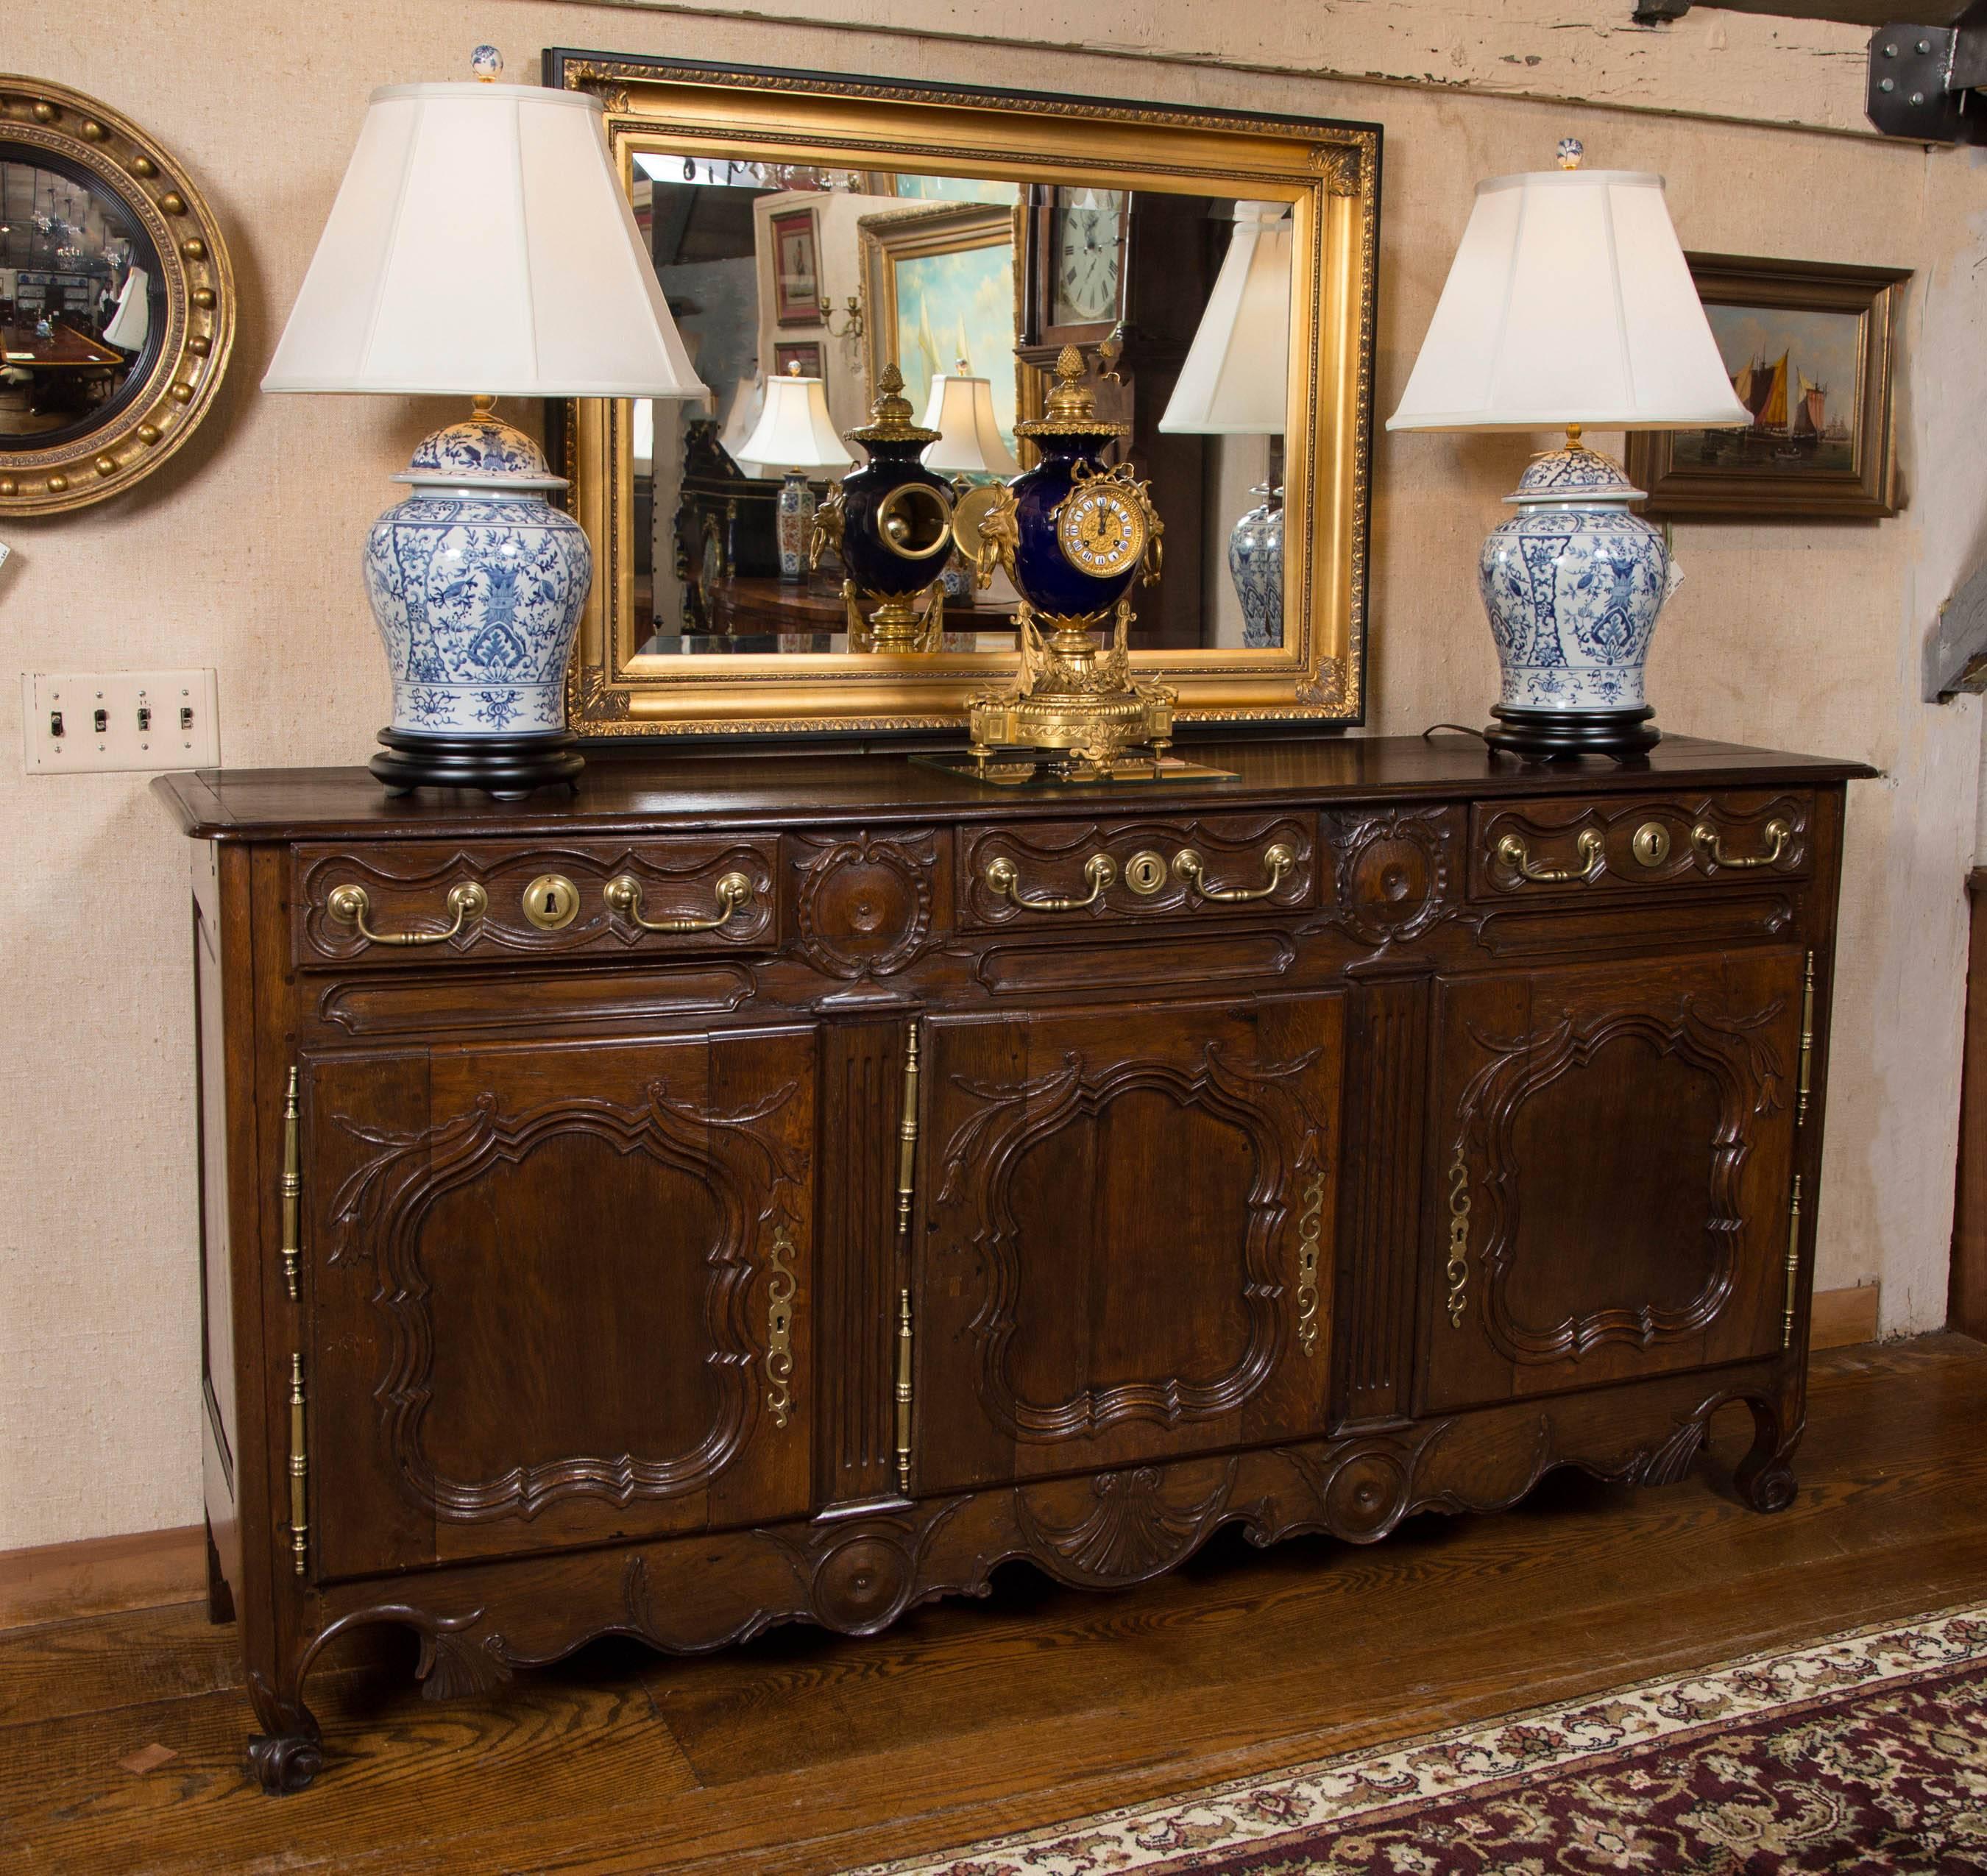 French oak enfilade with three-plank top, breadboard ends and thumb moulded edge over three drawers and three paneled doors. Robust carved doors separated by garland wreaths sitting atop fluted columns resting on circular medallions. Shaped and